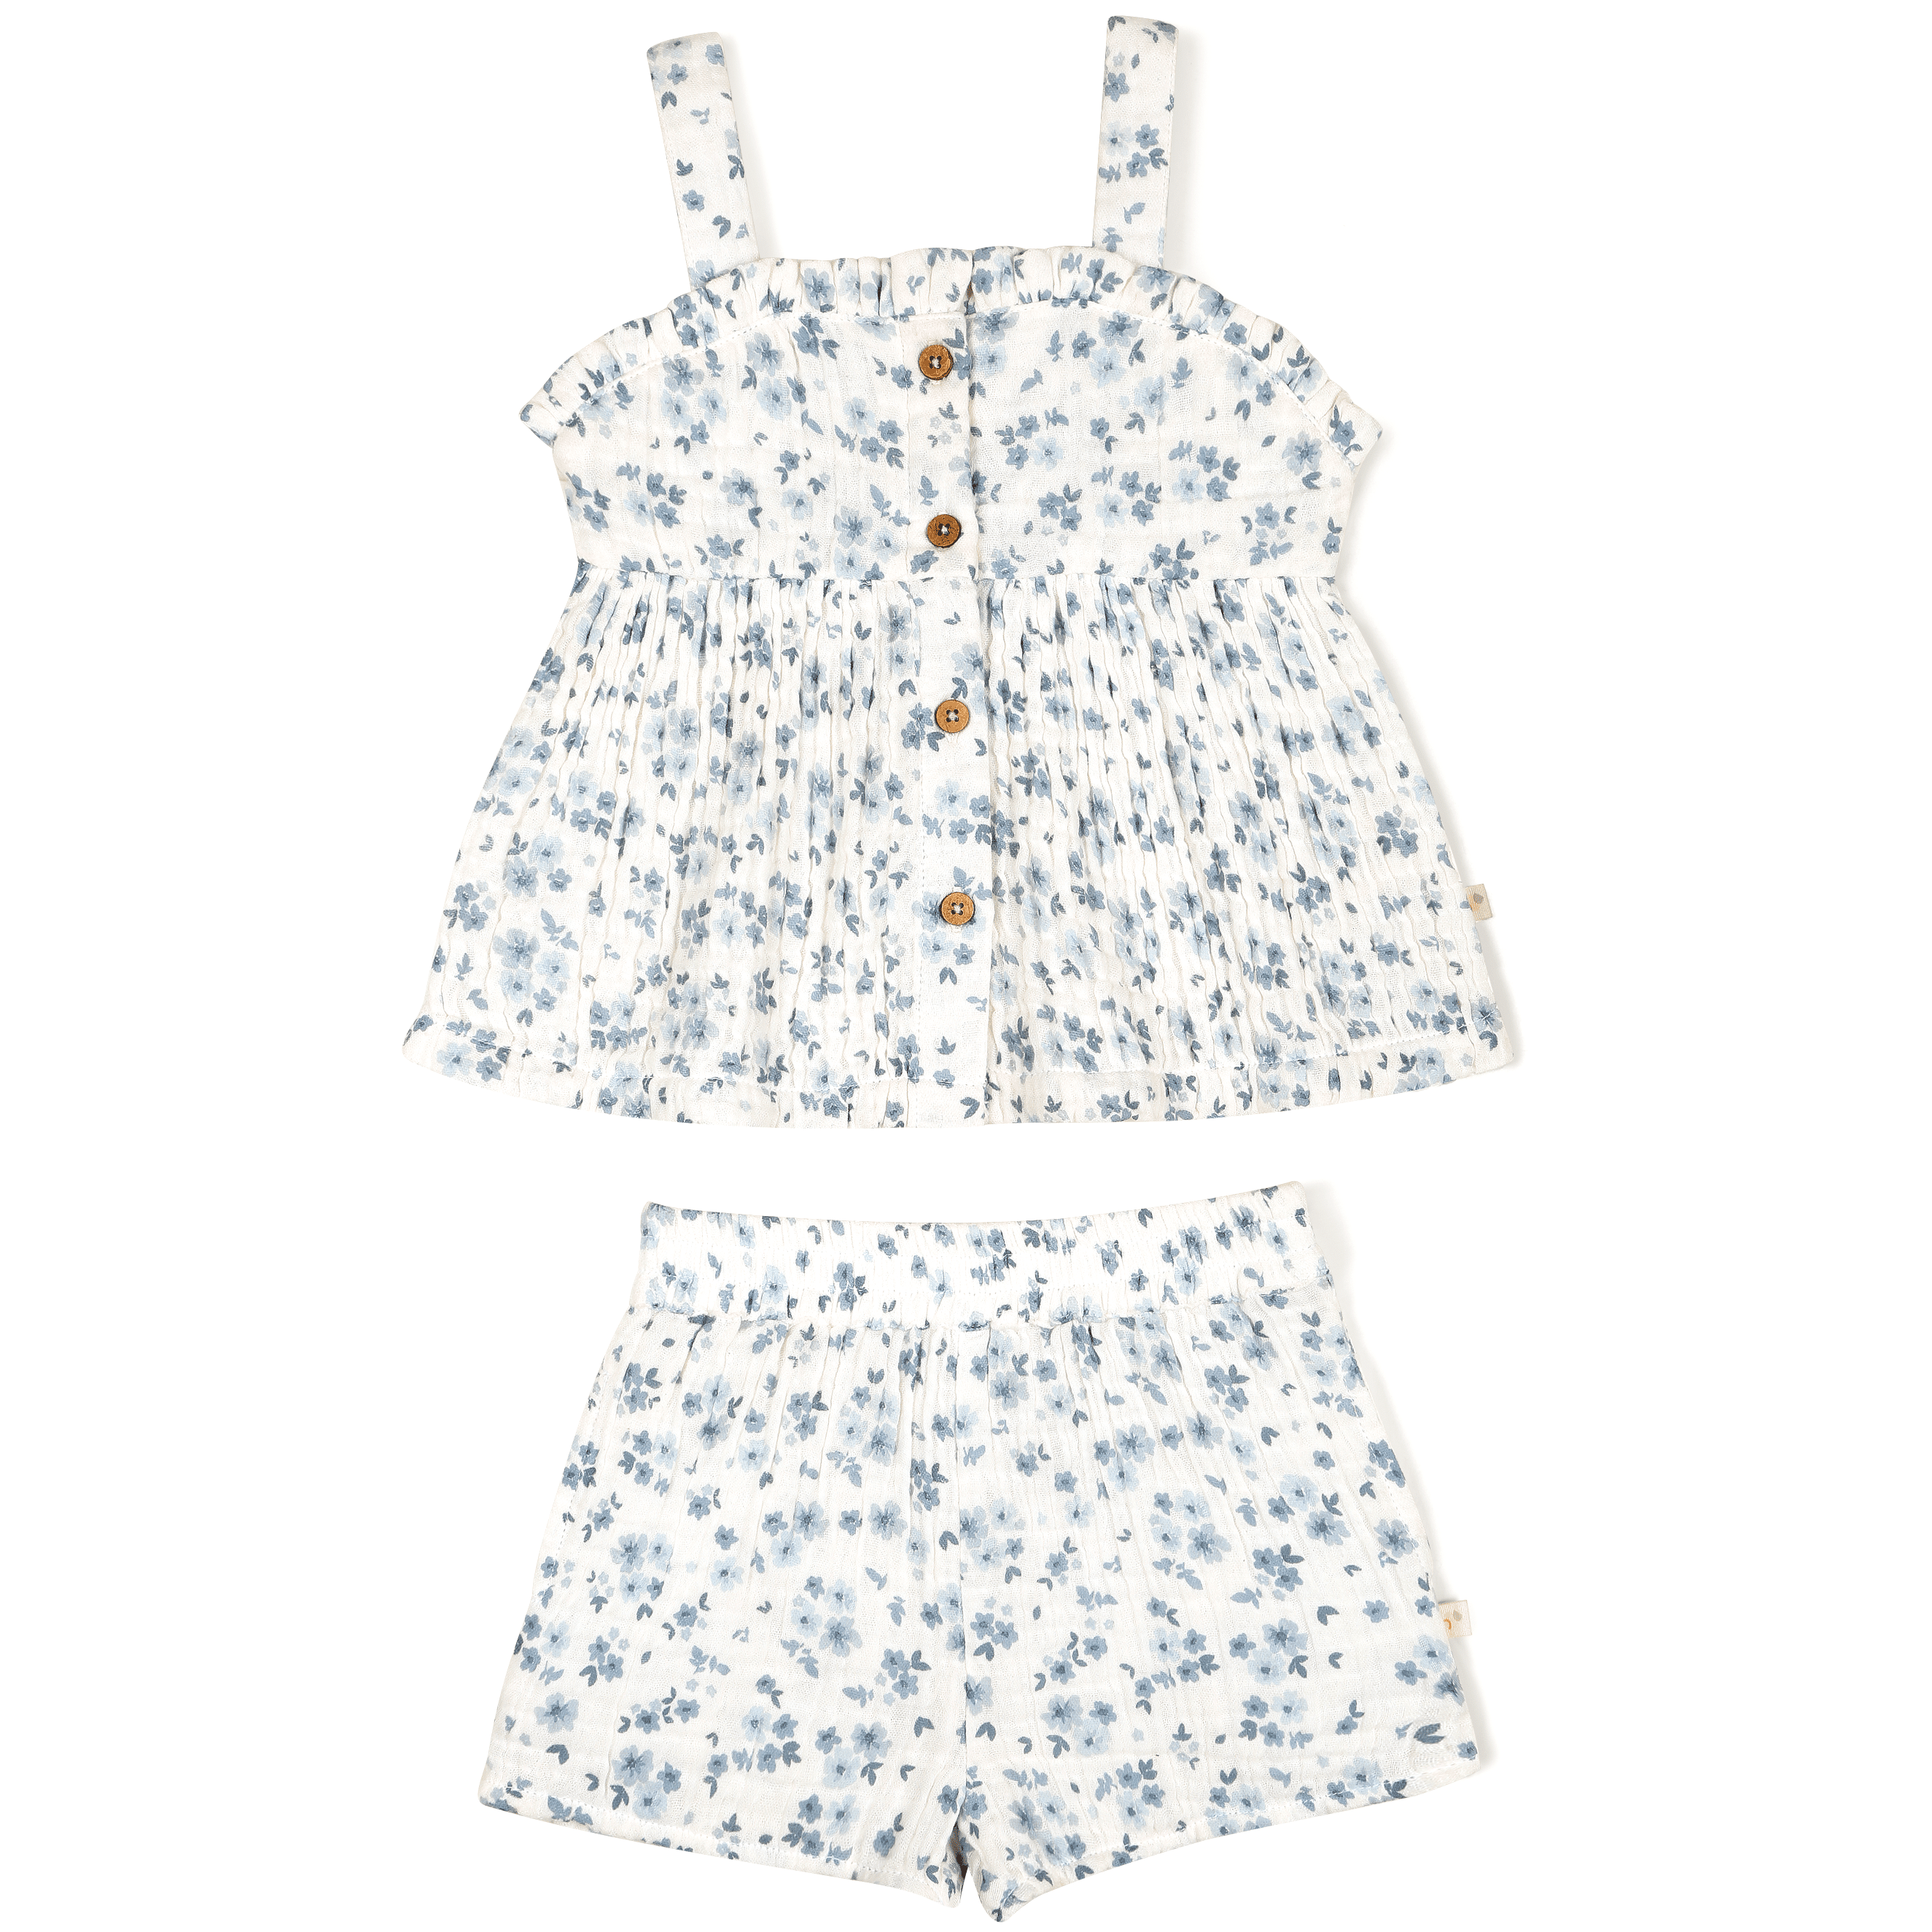 A toddler's outfit comprising a Organic Muslin Peplum Top and Shorts Set in periwinkle, displayed on a white background. Brand name: Makemake Organics.